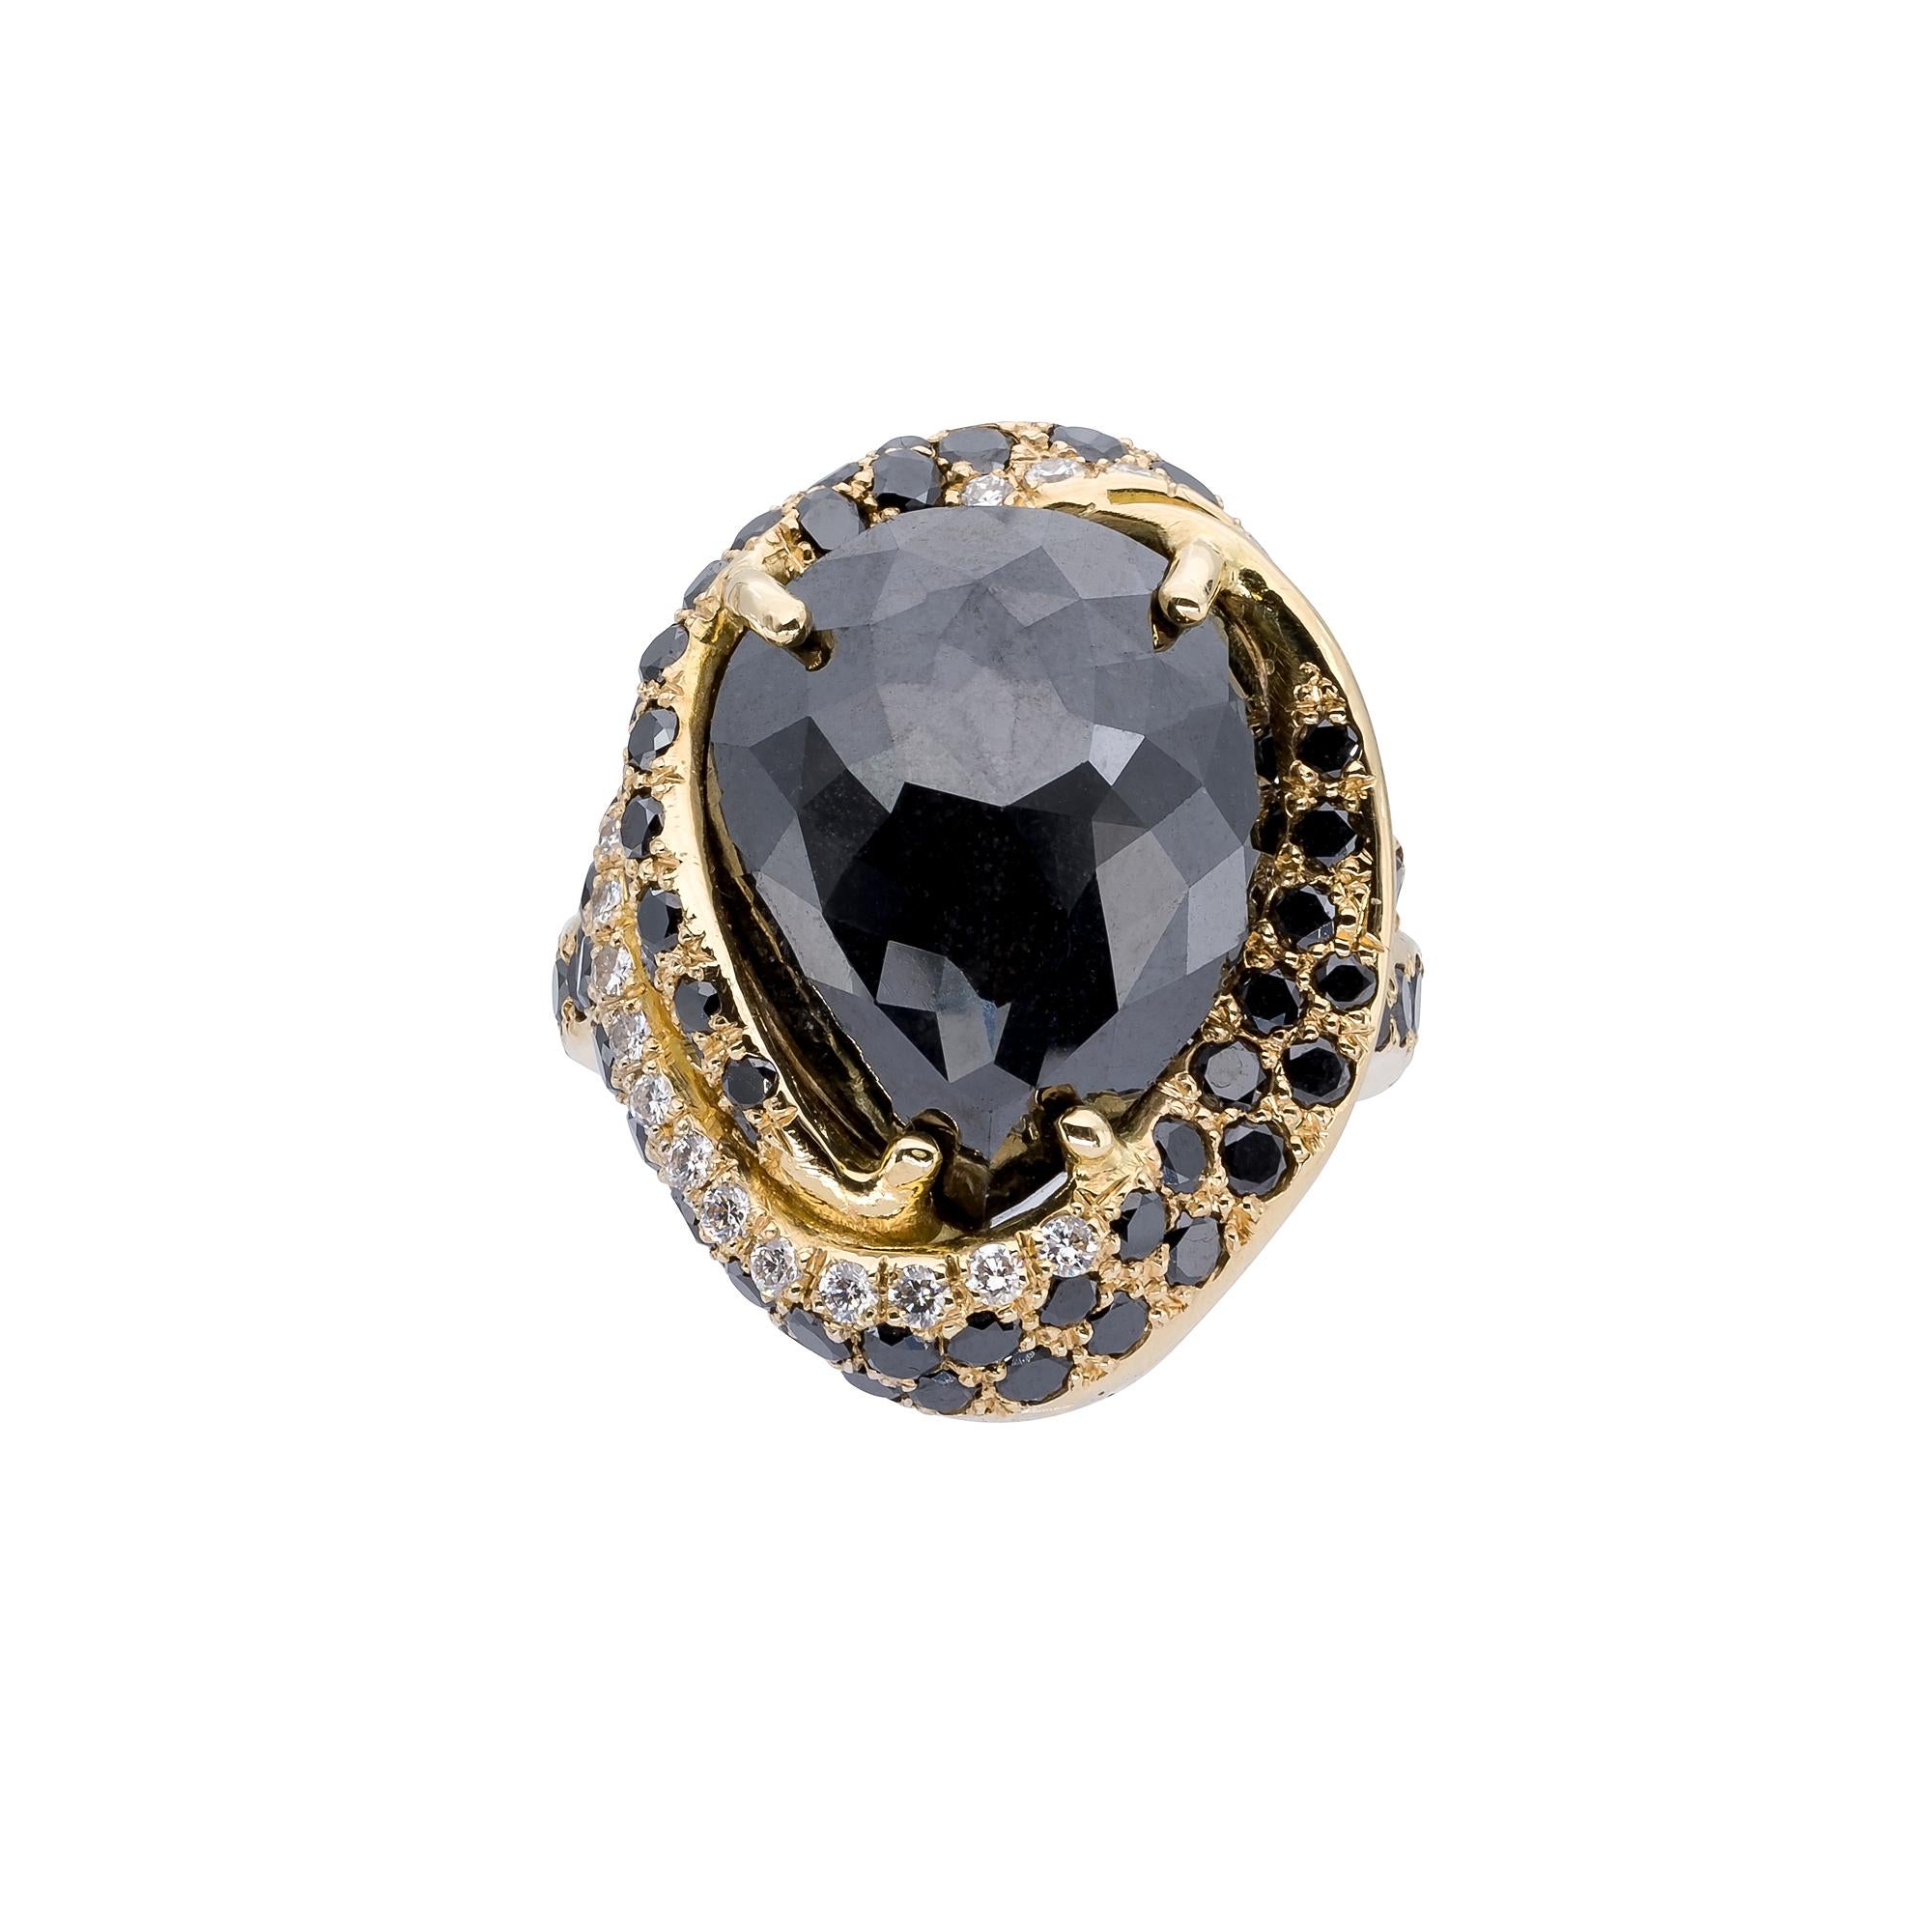 A Ring from d'Avossa Masterpiece Collection in yellow 18 kt gold with a Central Pear Shape Black Diamond briolé cut with a contour pavé of black and white diamonds 

Ref. Number ABT697

